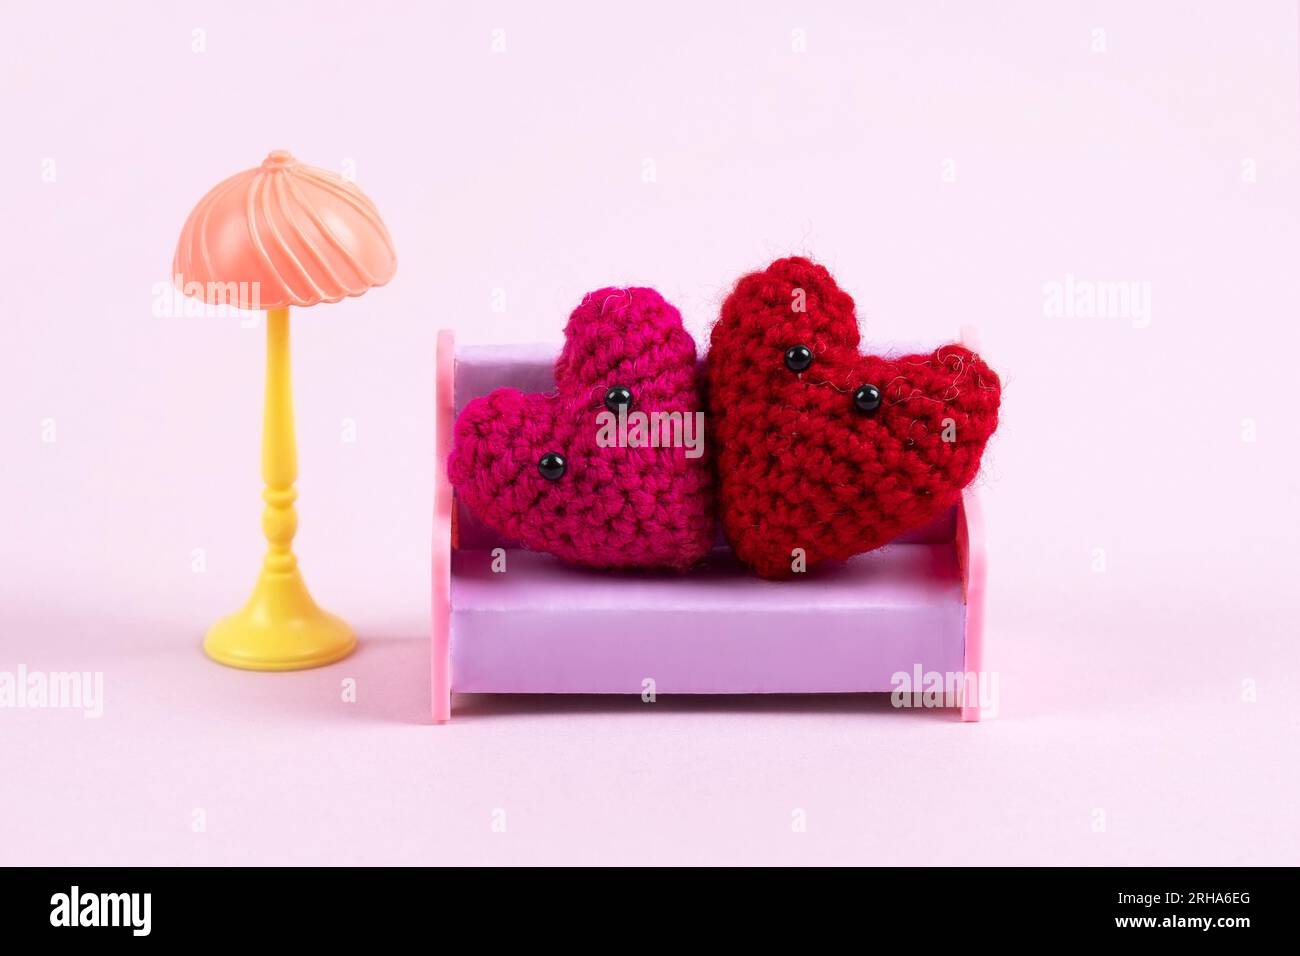 Composition from family of knitted red hearts that sit on toy sofa on a lilac background. Symbol of love. Knitting children's toys, hobbies and access Stock Photo